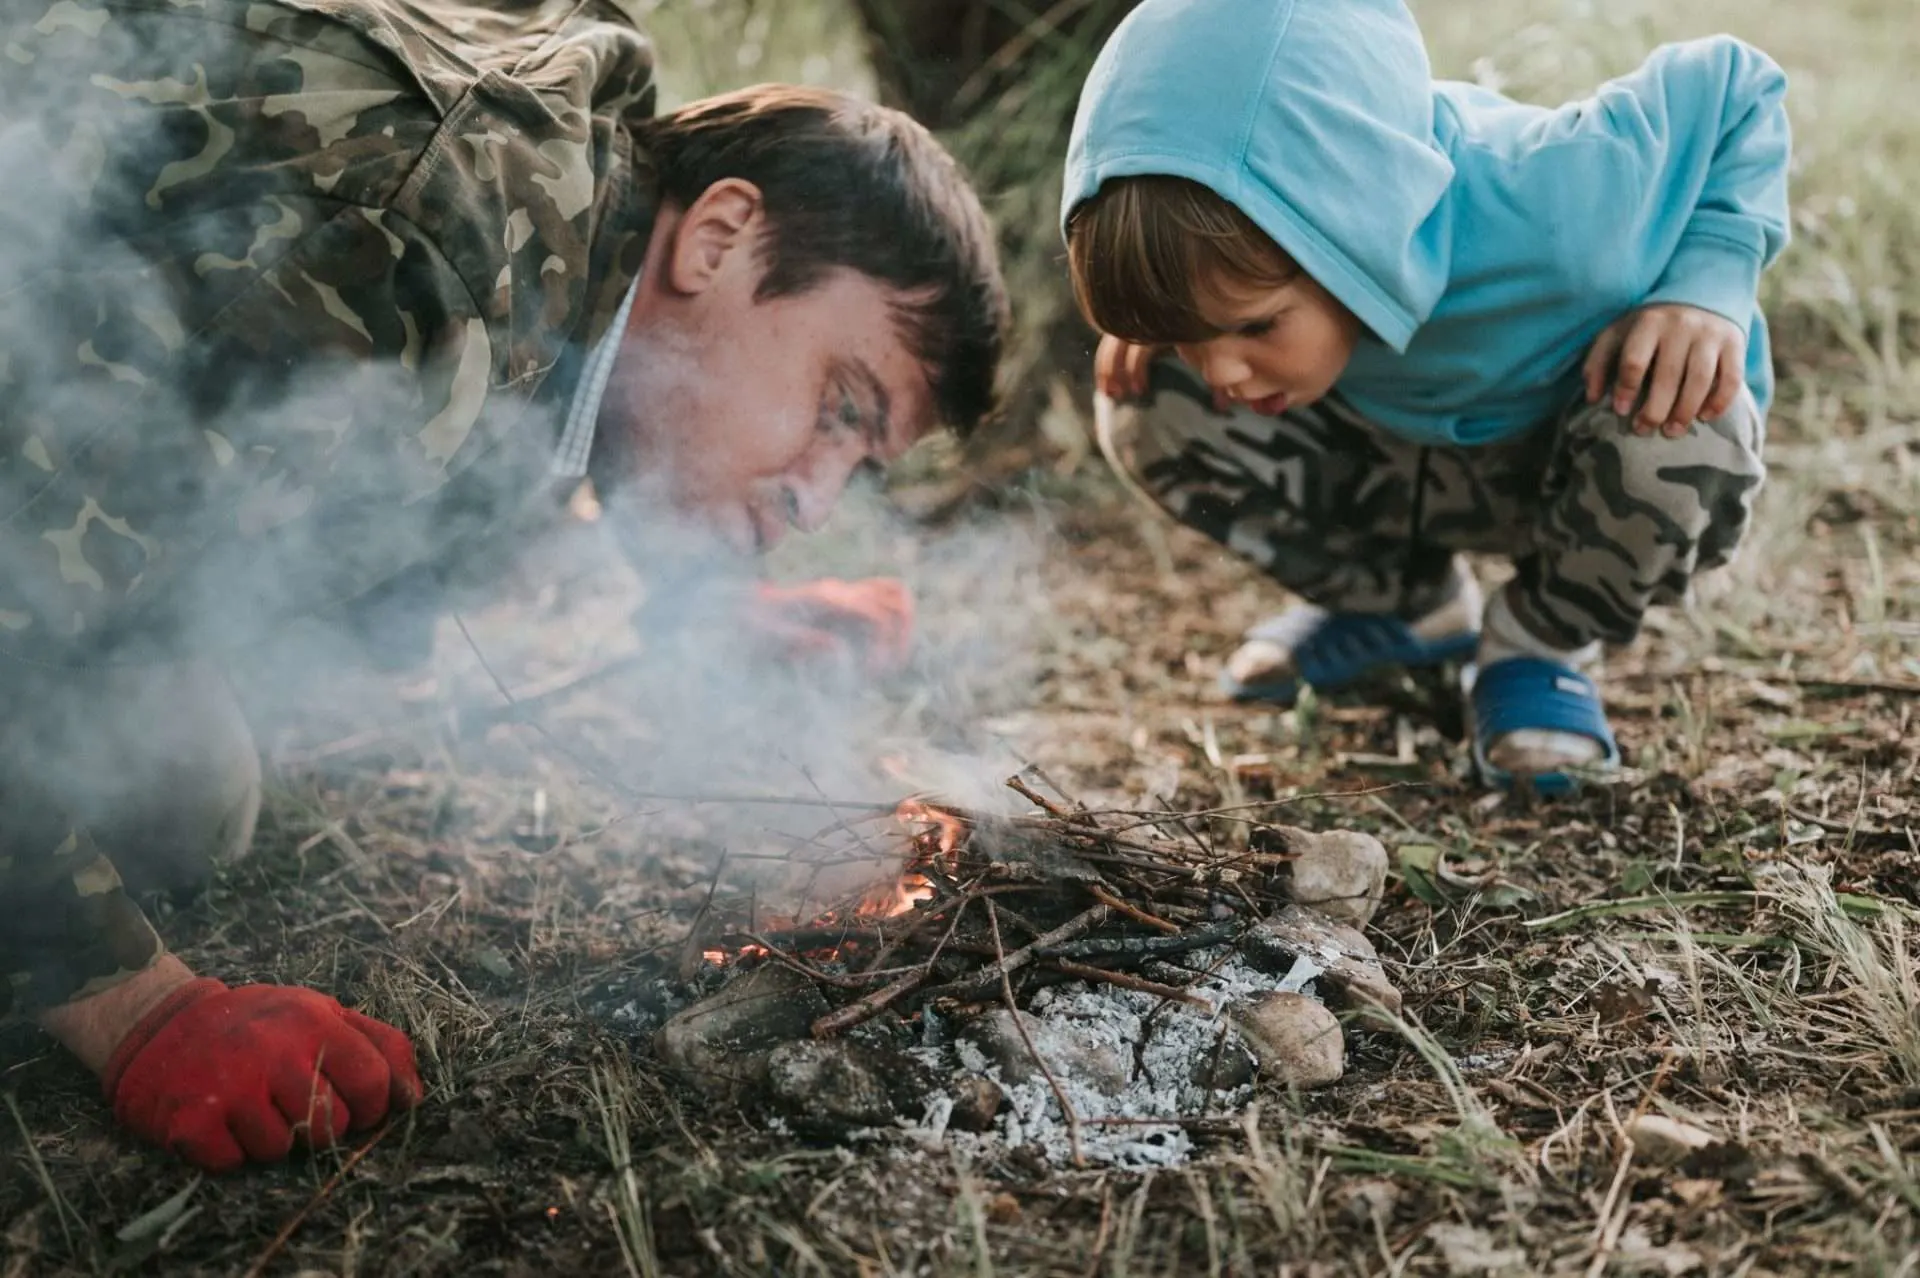 Father and son building a fire together while survival camping